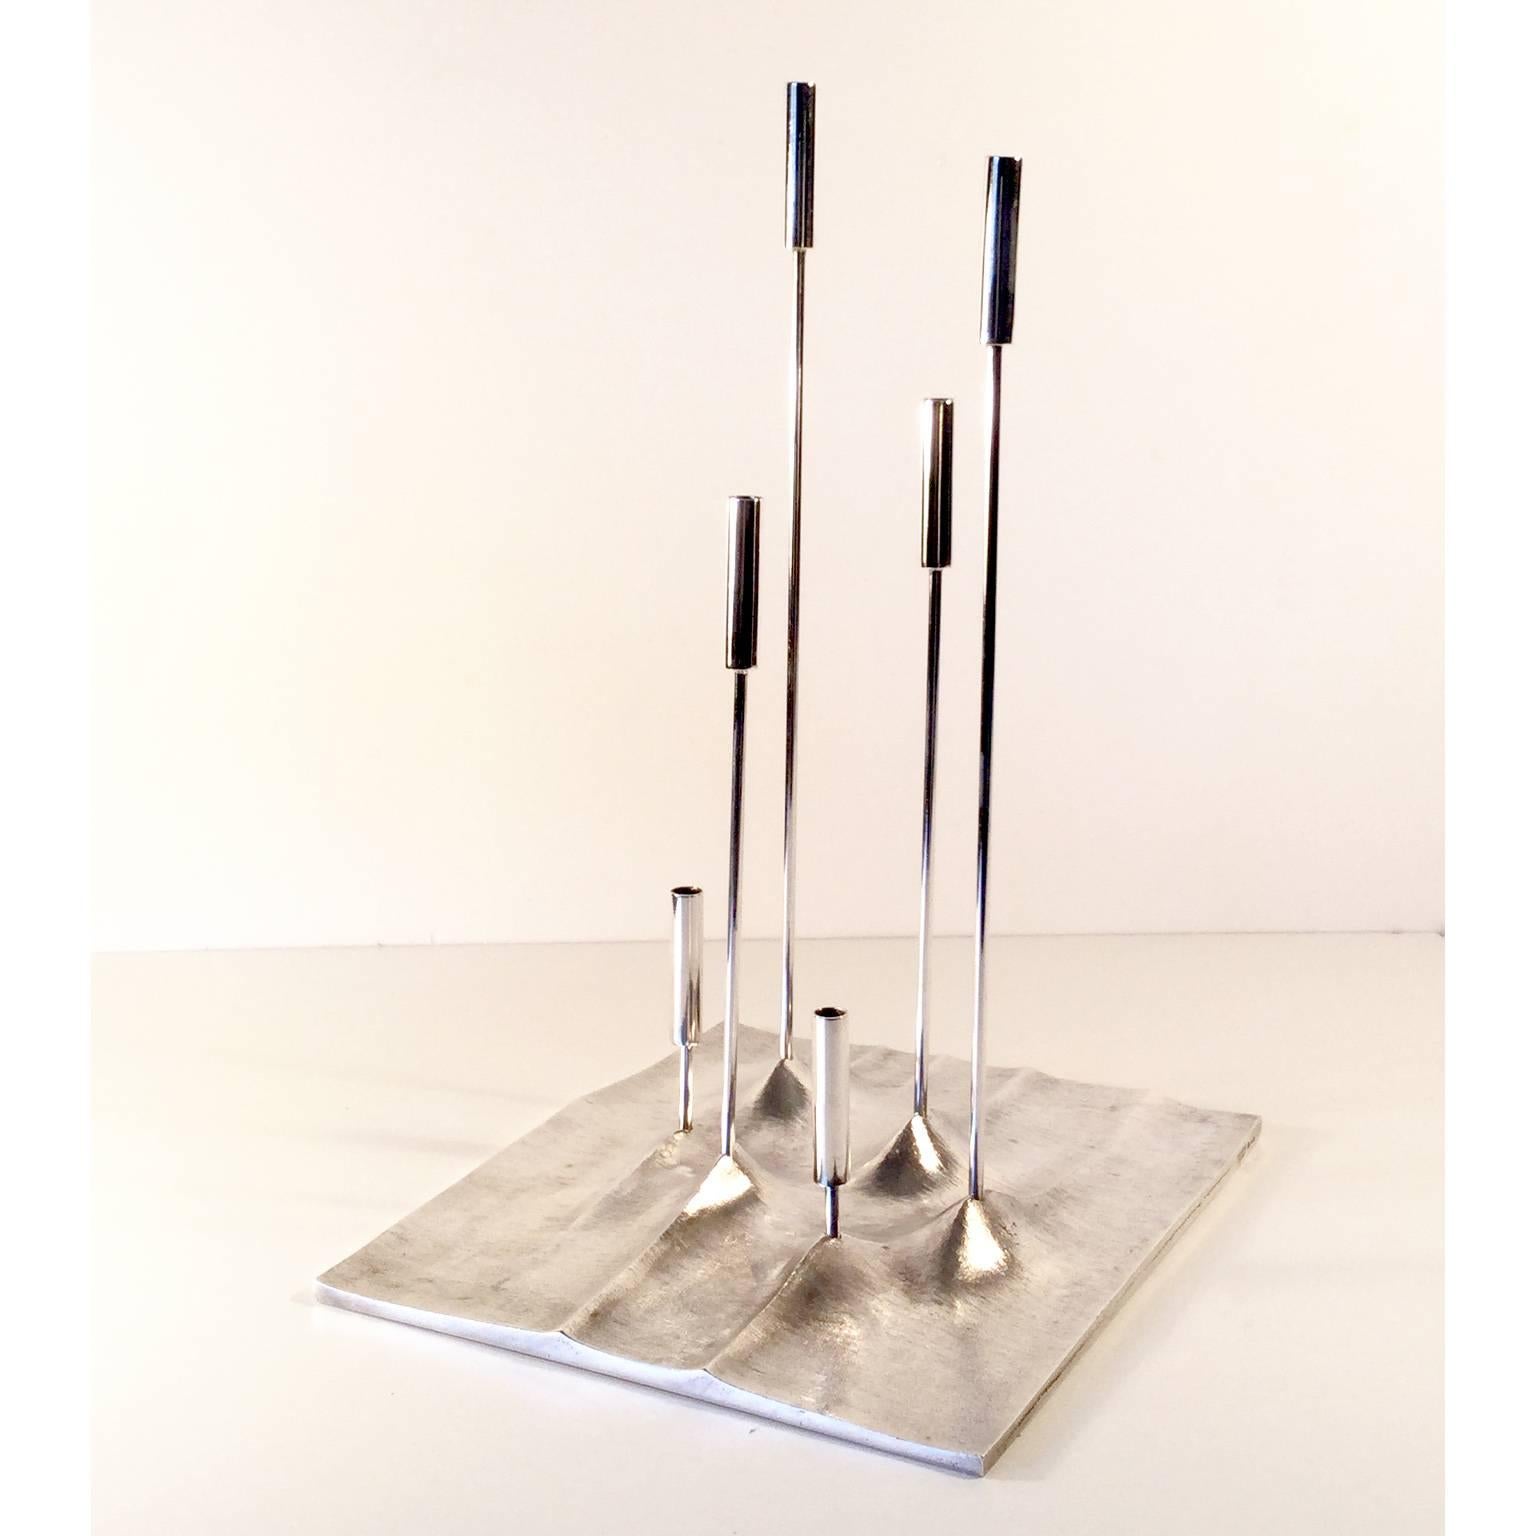 "Sol Lunaire" 1959 silver plated candleholder Design by the Finnish Designer by Tapio Wirkkala; stamp by the French Silversmith Christofle Gallia.